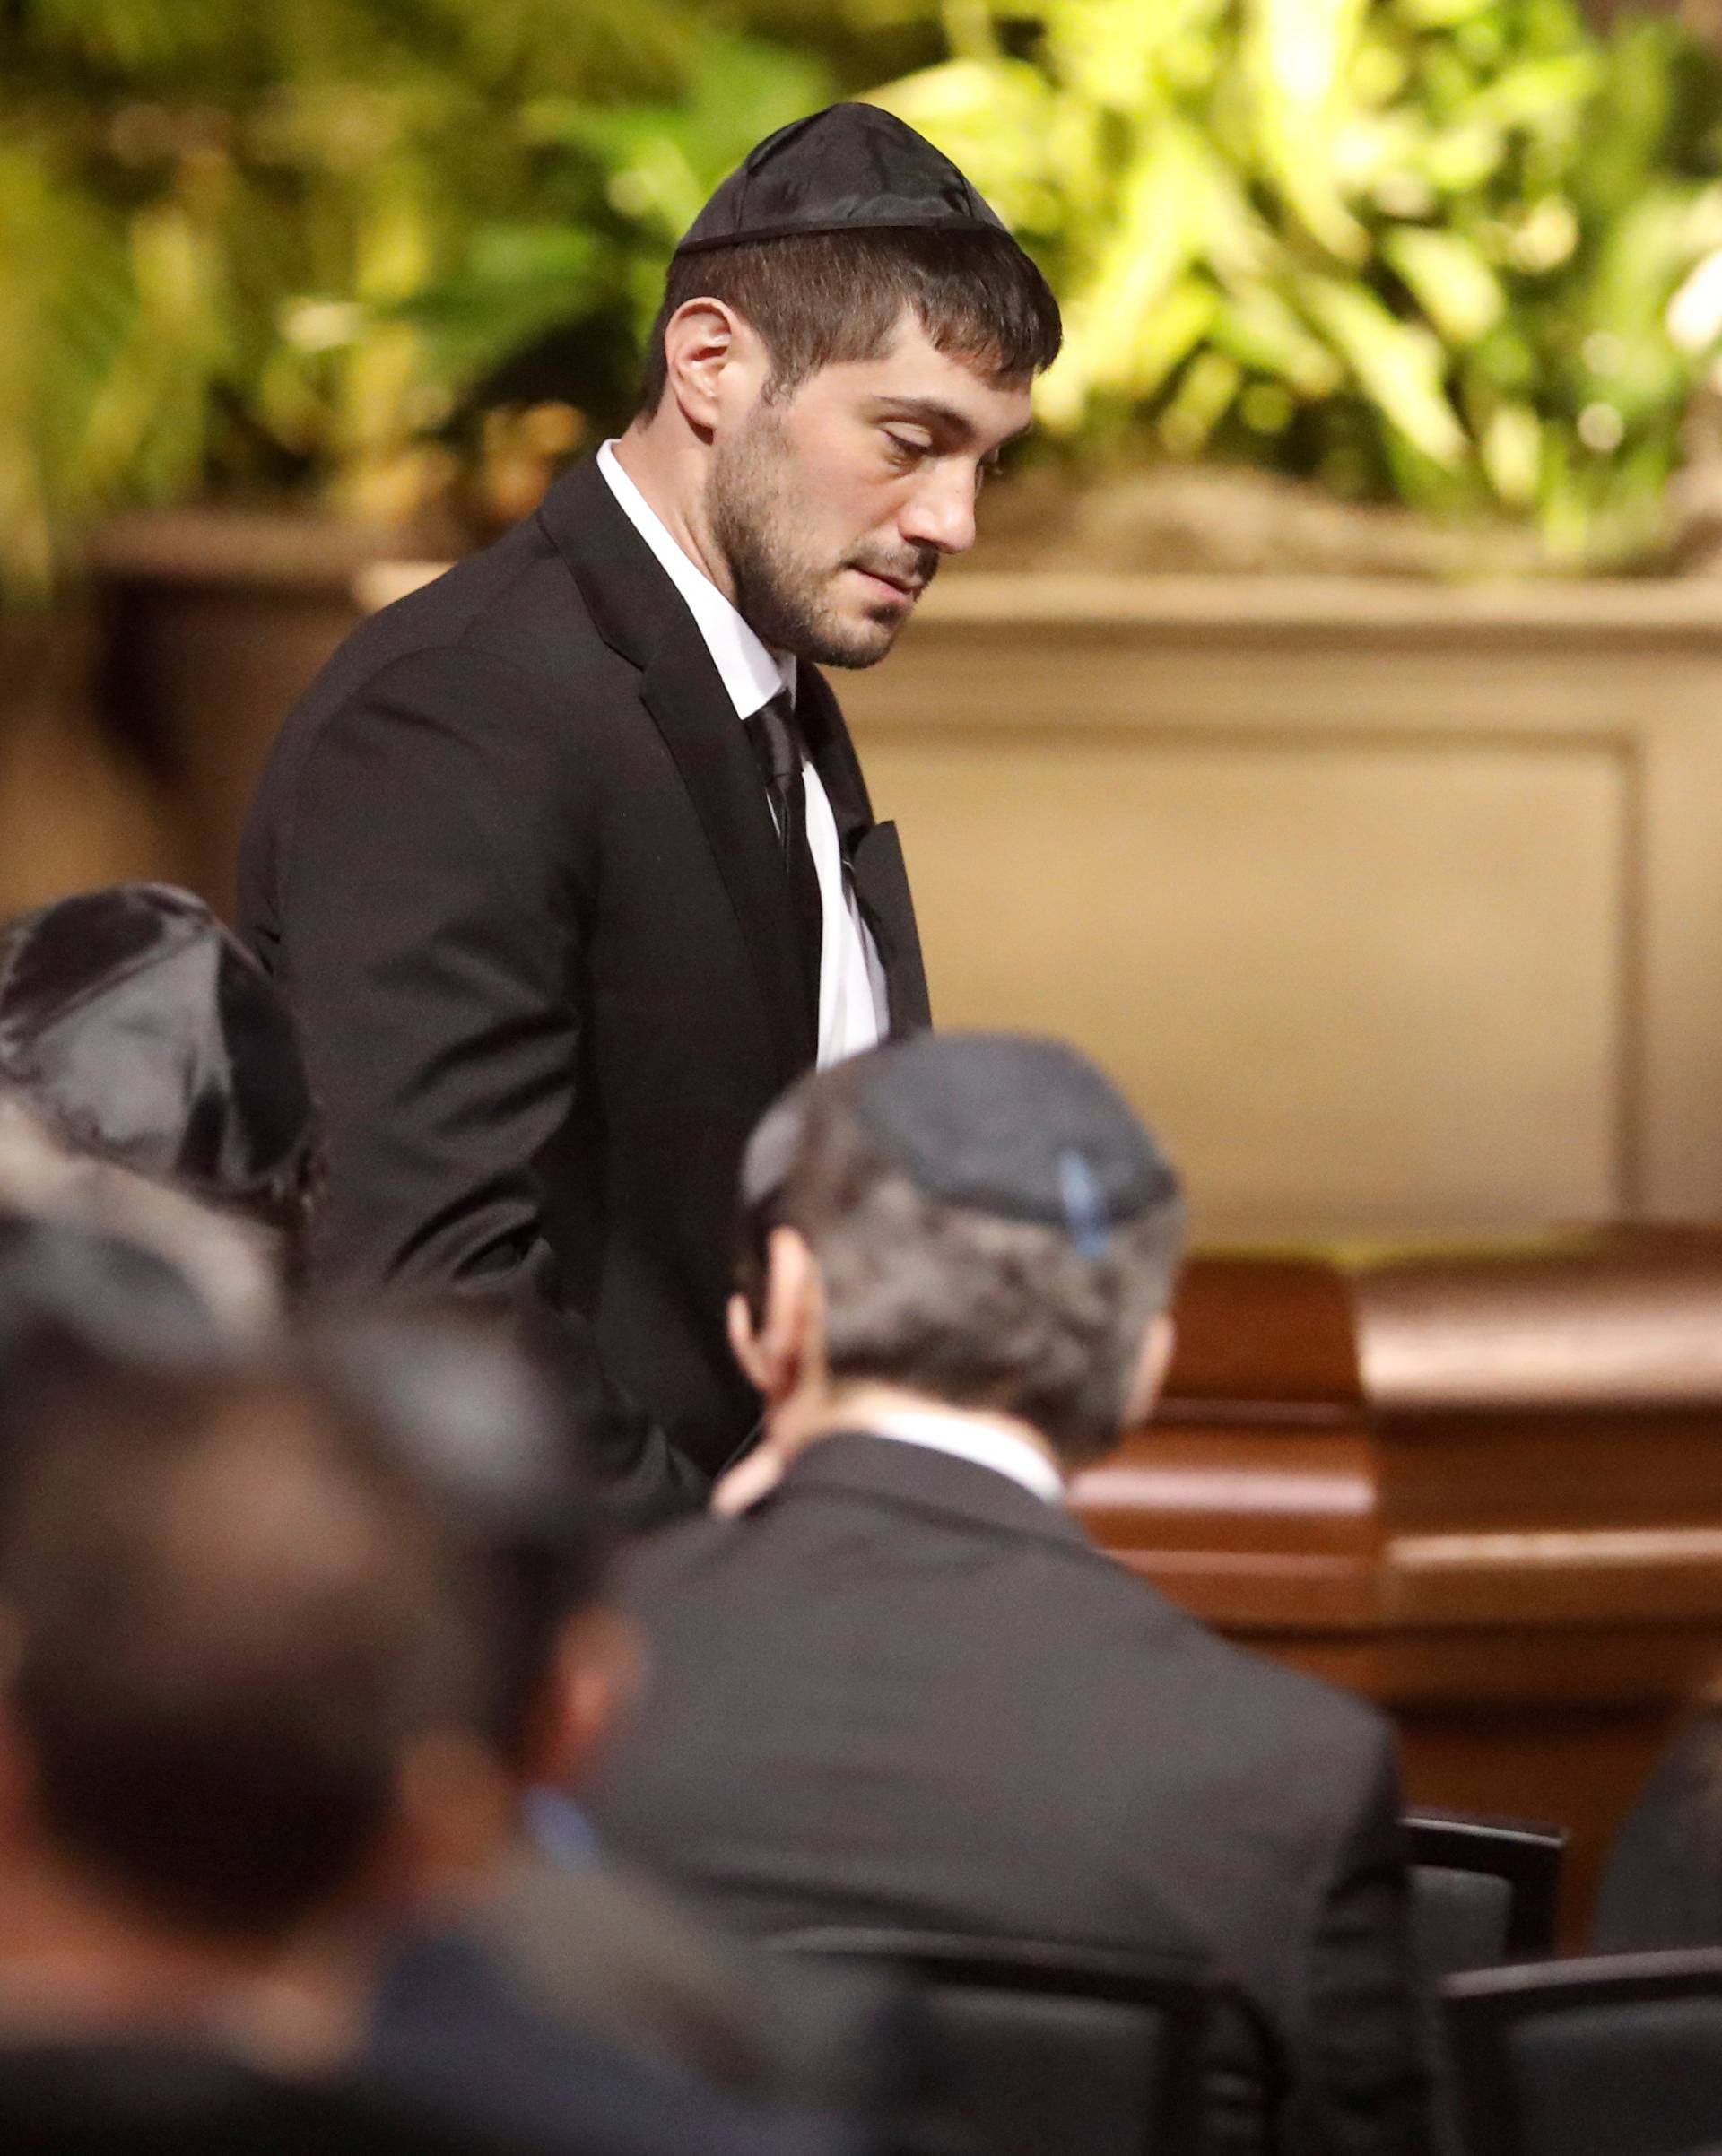 Jonathon Sherman walks by one of his parents caskets at their memorial service who were Apotex pharmaceutical billionaire Barry Sherman and his wife Honey days after what police call their suspicious deaths in Toronto